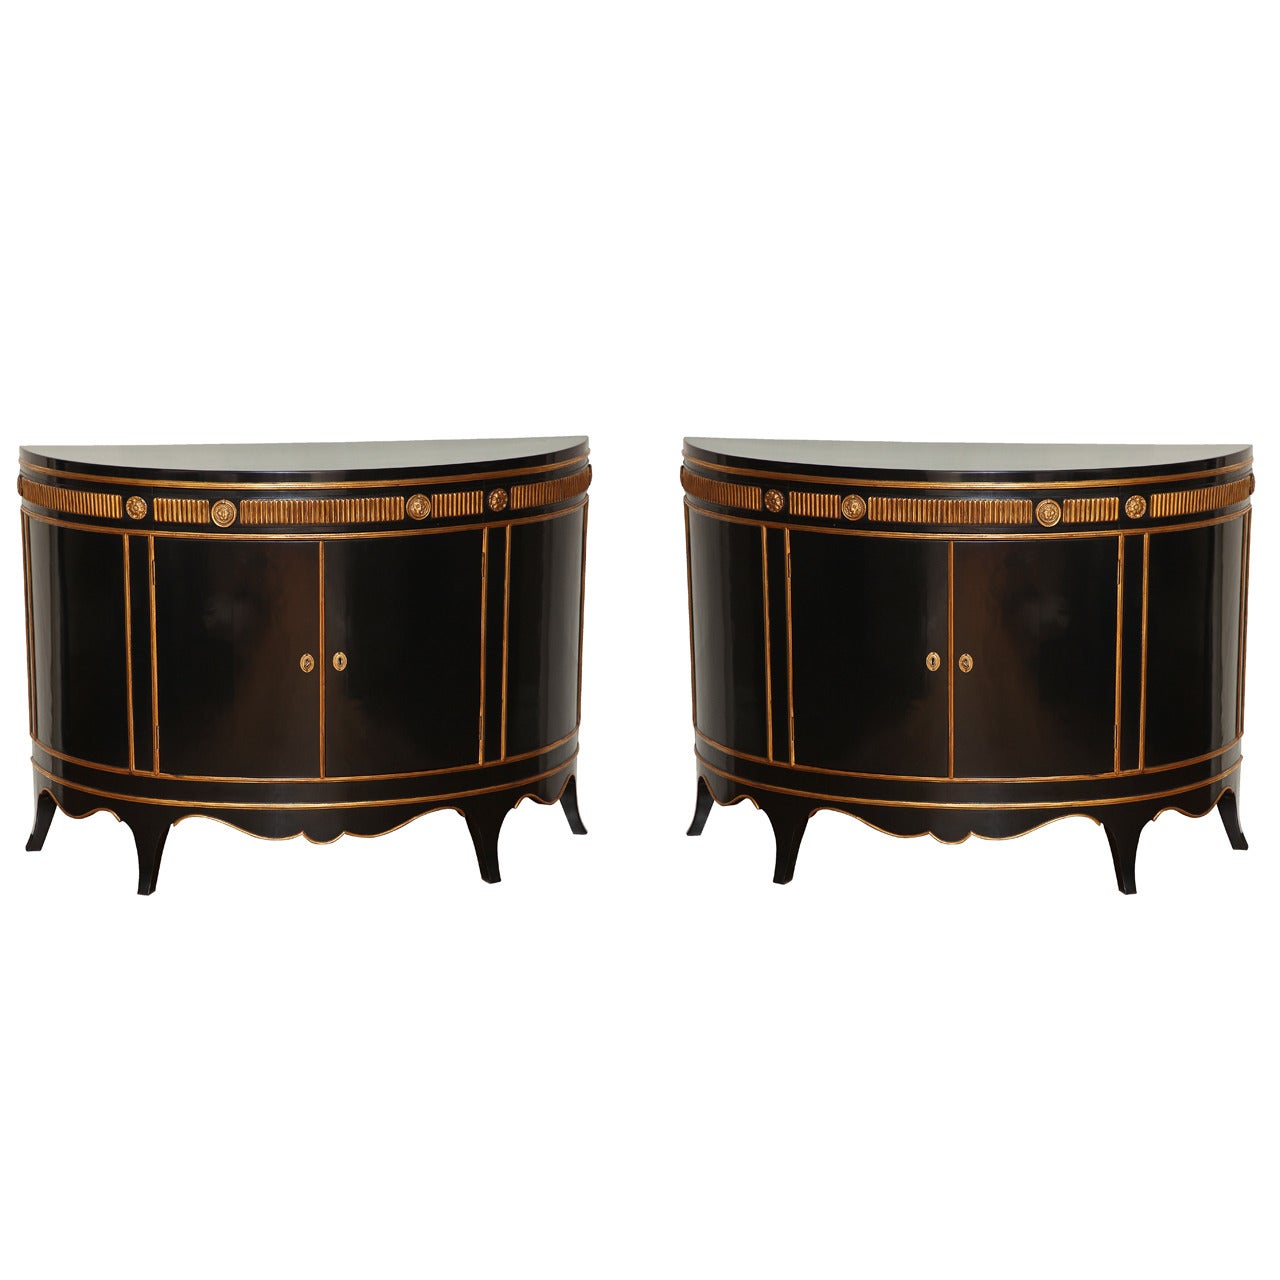 Pair of English George III Style Demilune Cabinets